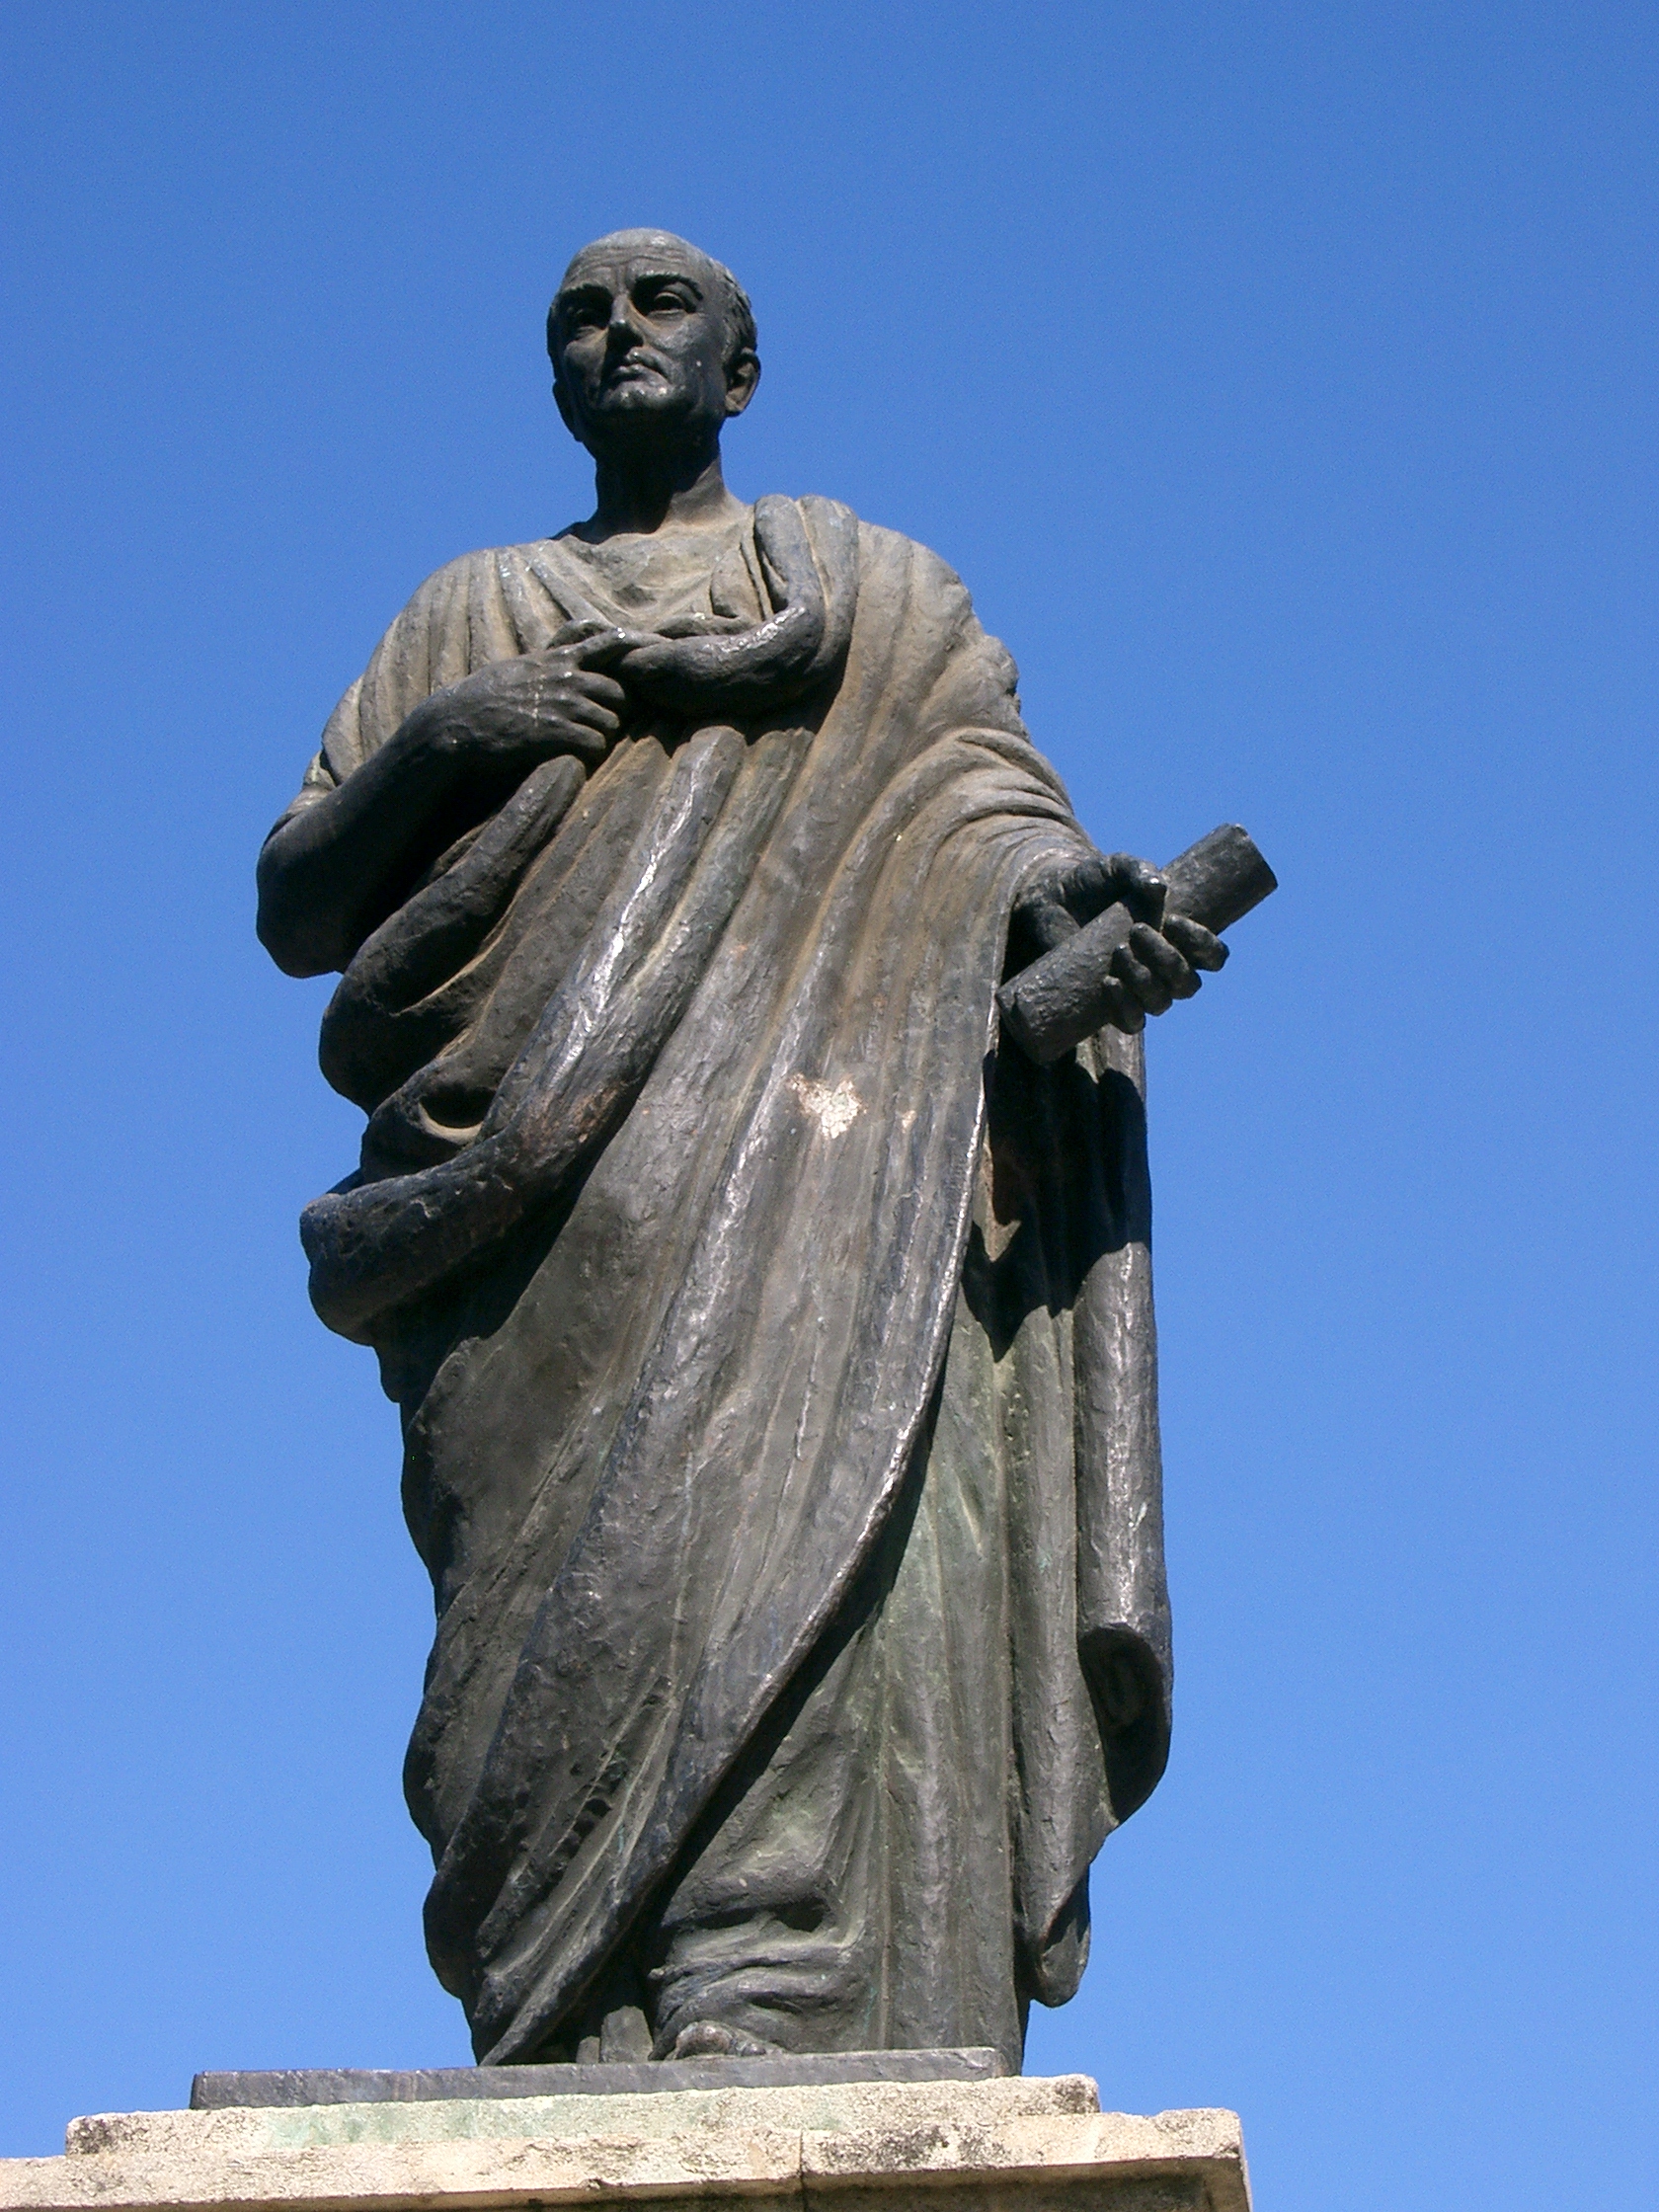 A statue of Seneca with a book in his hand.